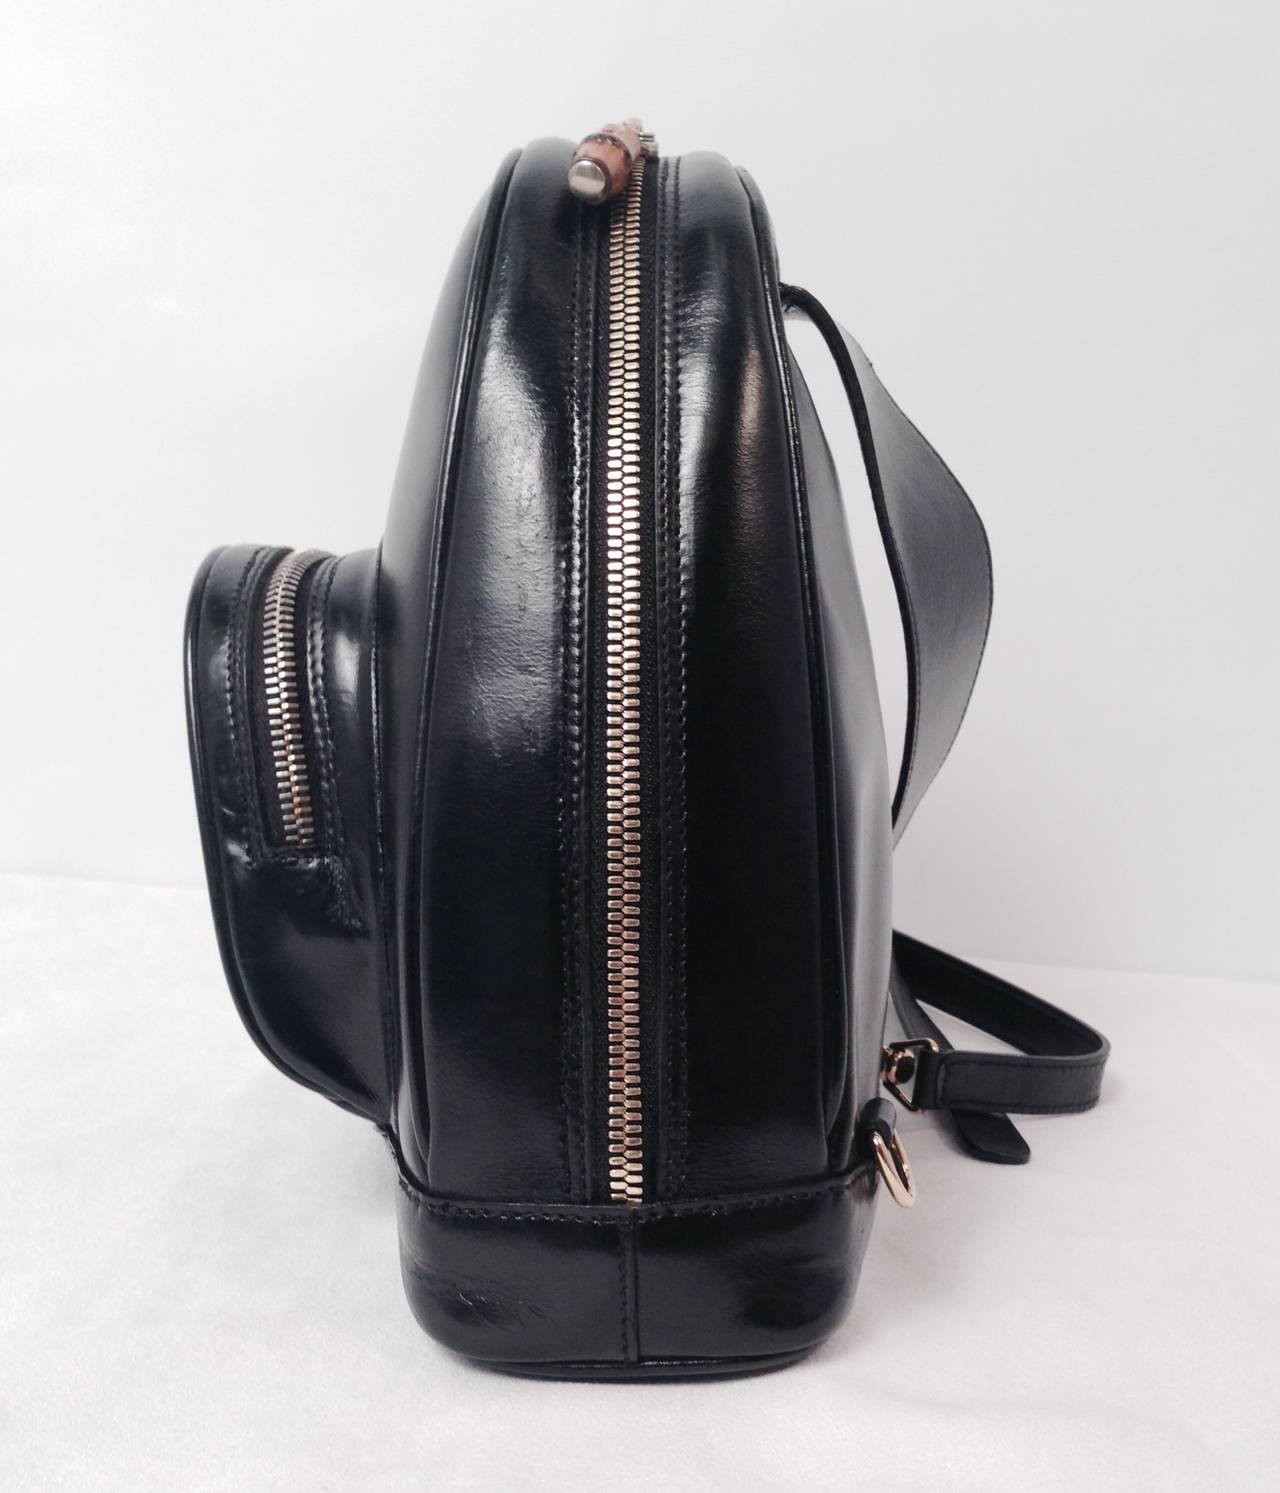 Gucci Black Patent Leather Backpack With Bamboo Pendants In Excellent Condition For Sale In Palm Beach, FL